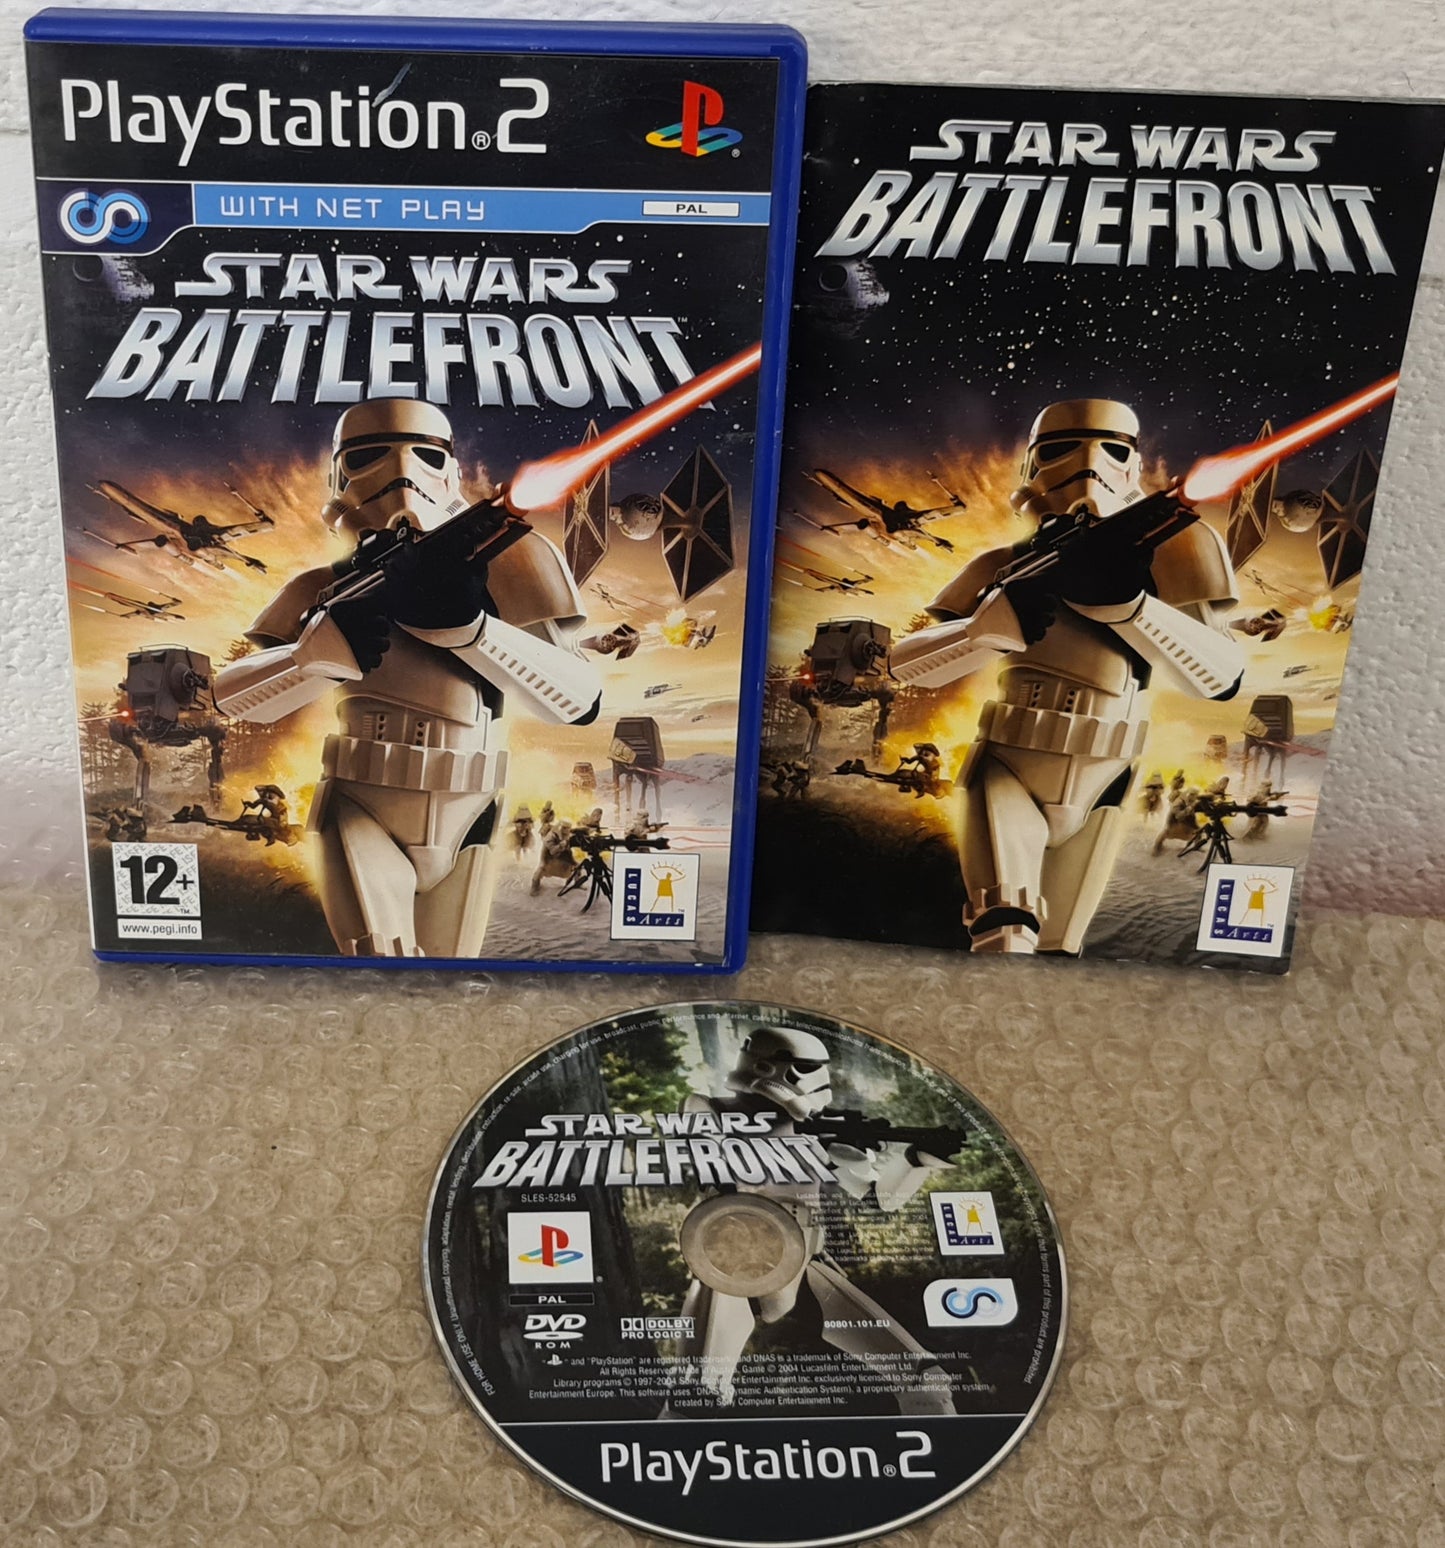 Star Wars Battlefront Sony Playstation 2 (PS2) Game